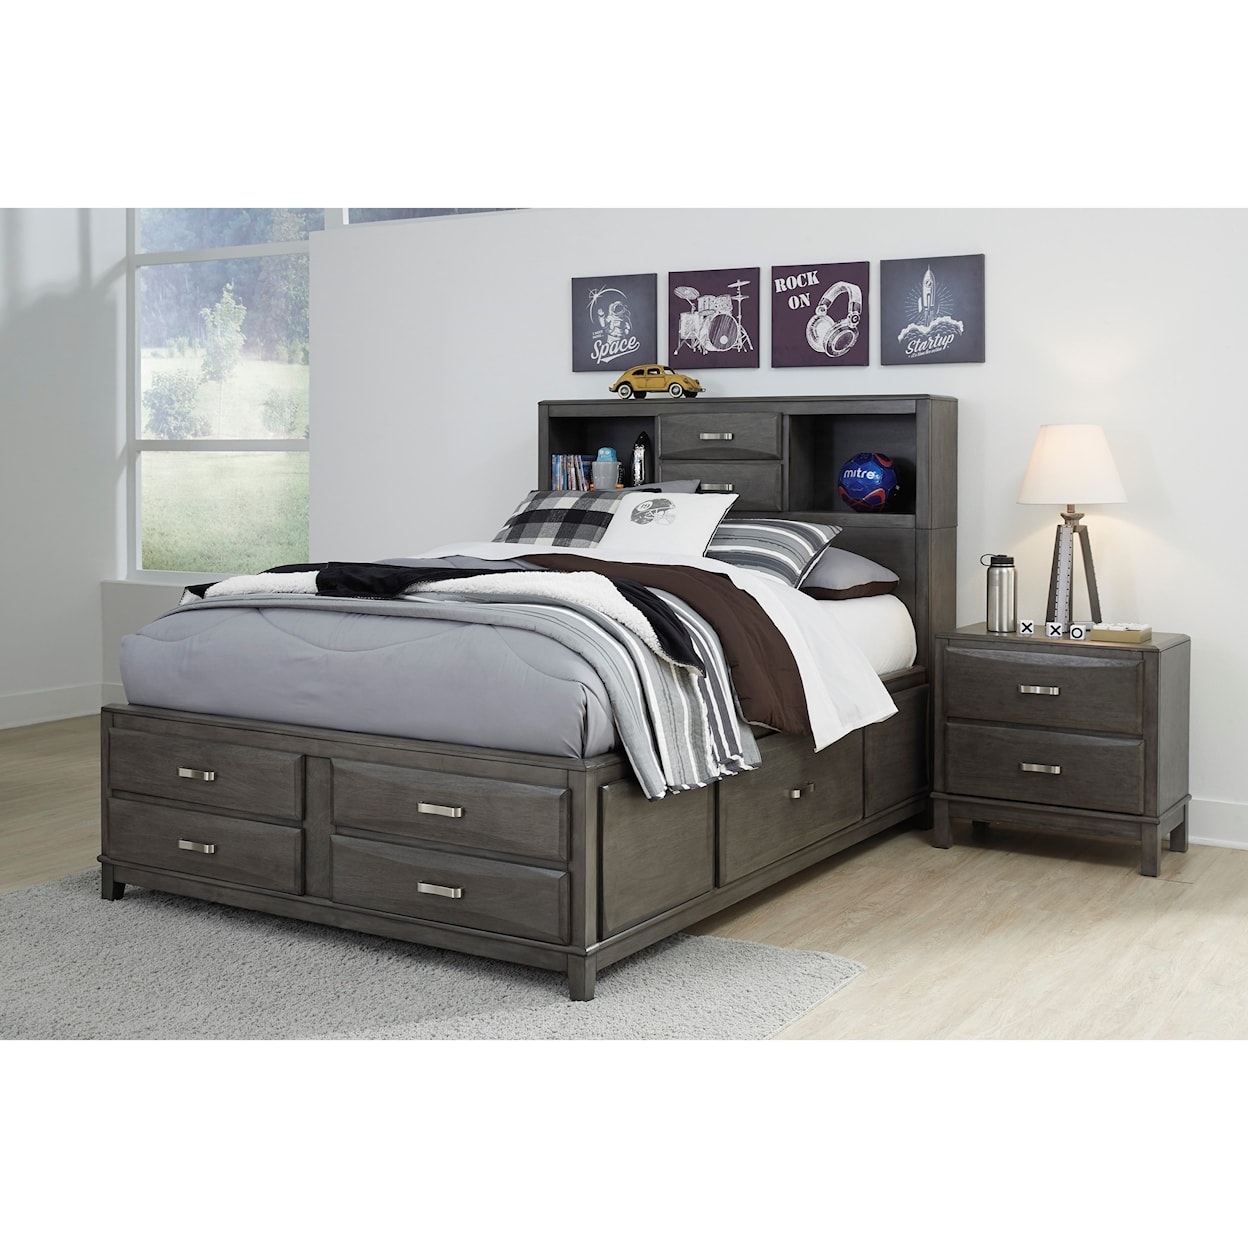 Ashley Furniture Signature Design Caitbrook Full Storage Bed with 7 Drawers